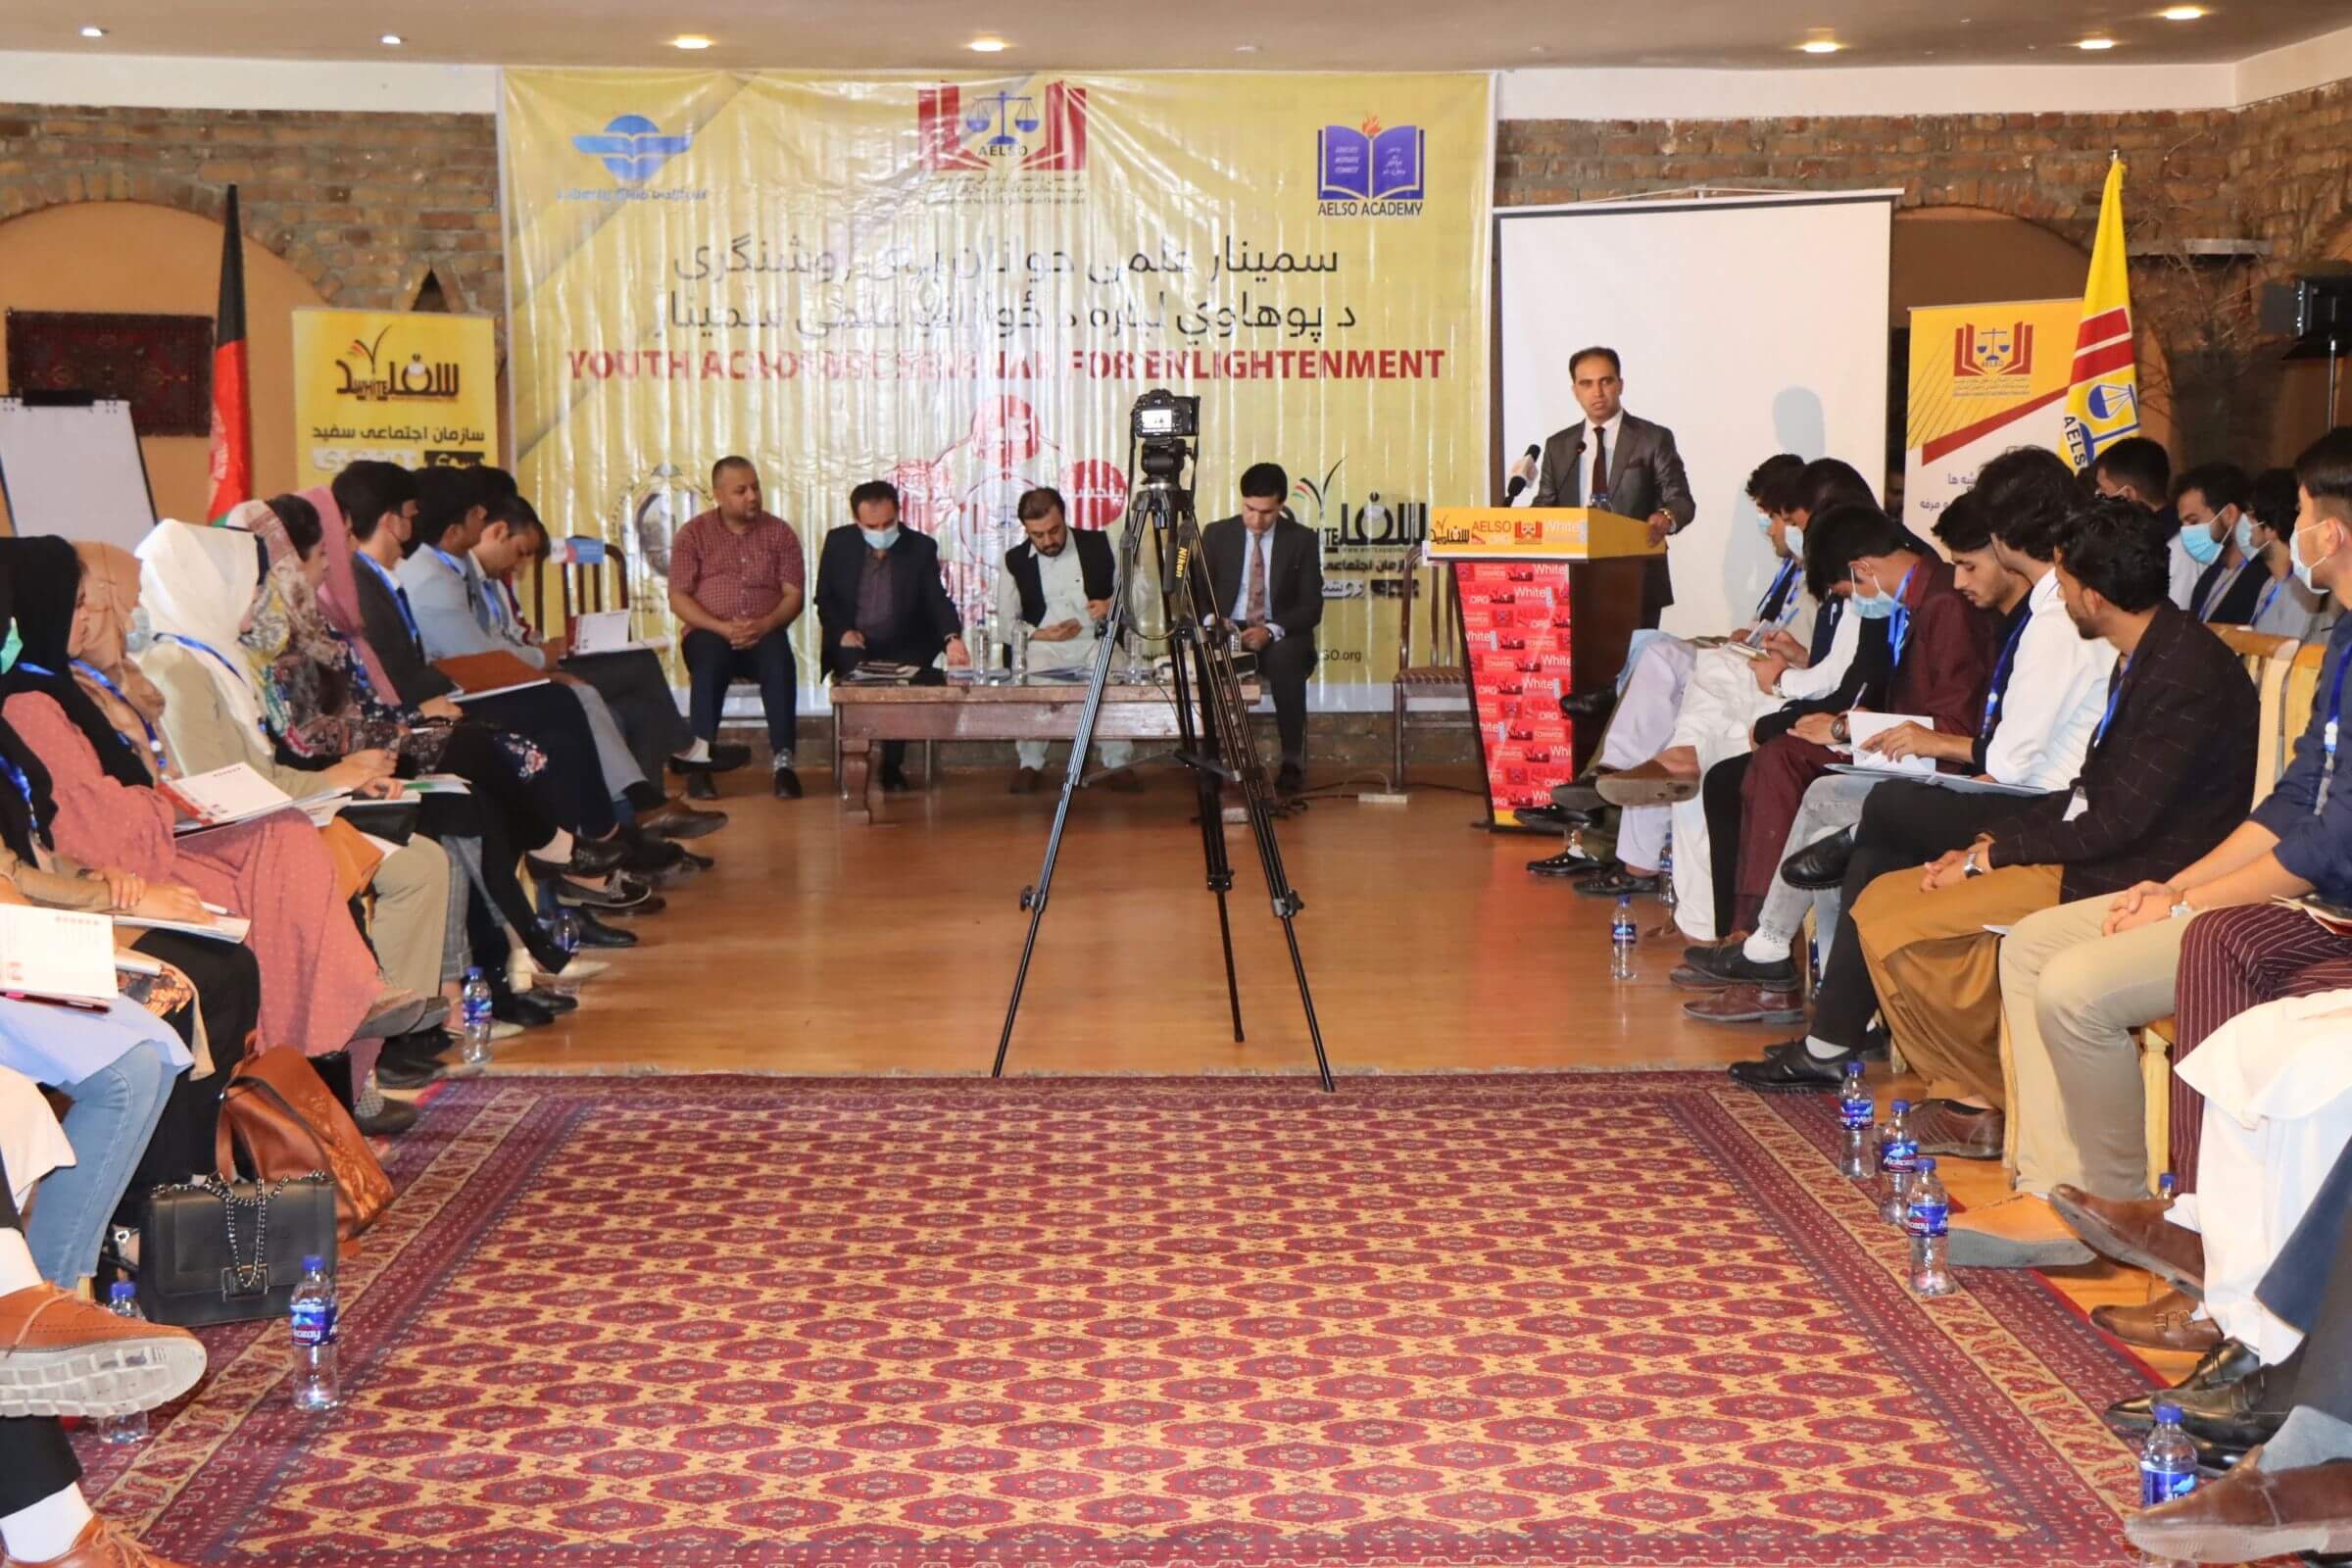 Youth Academic Seminar for Enlightenment – Central Zone